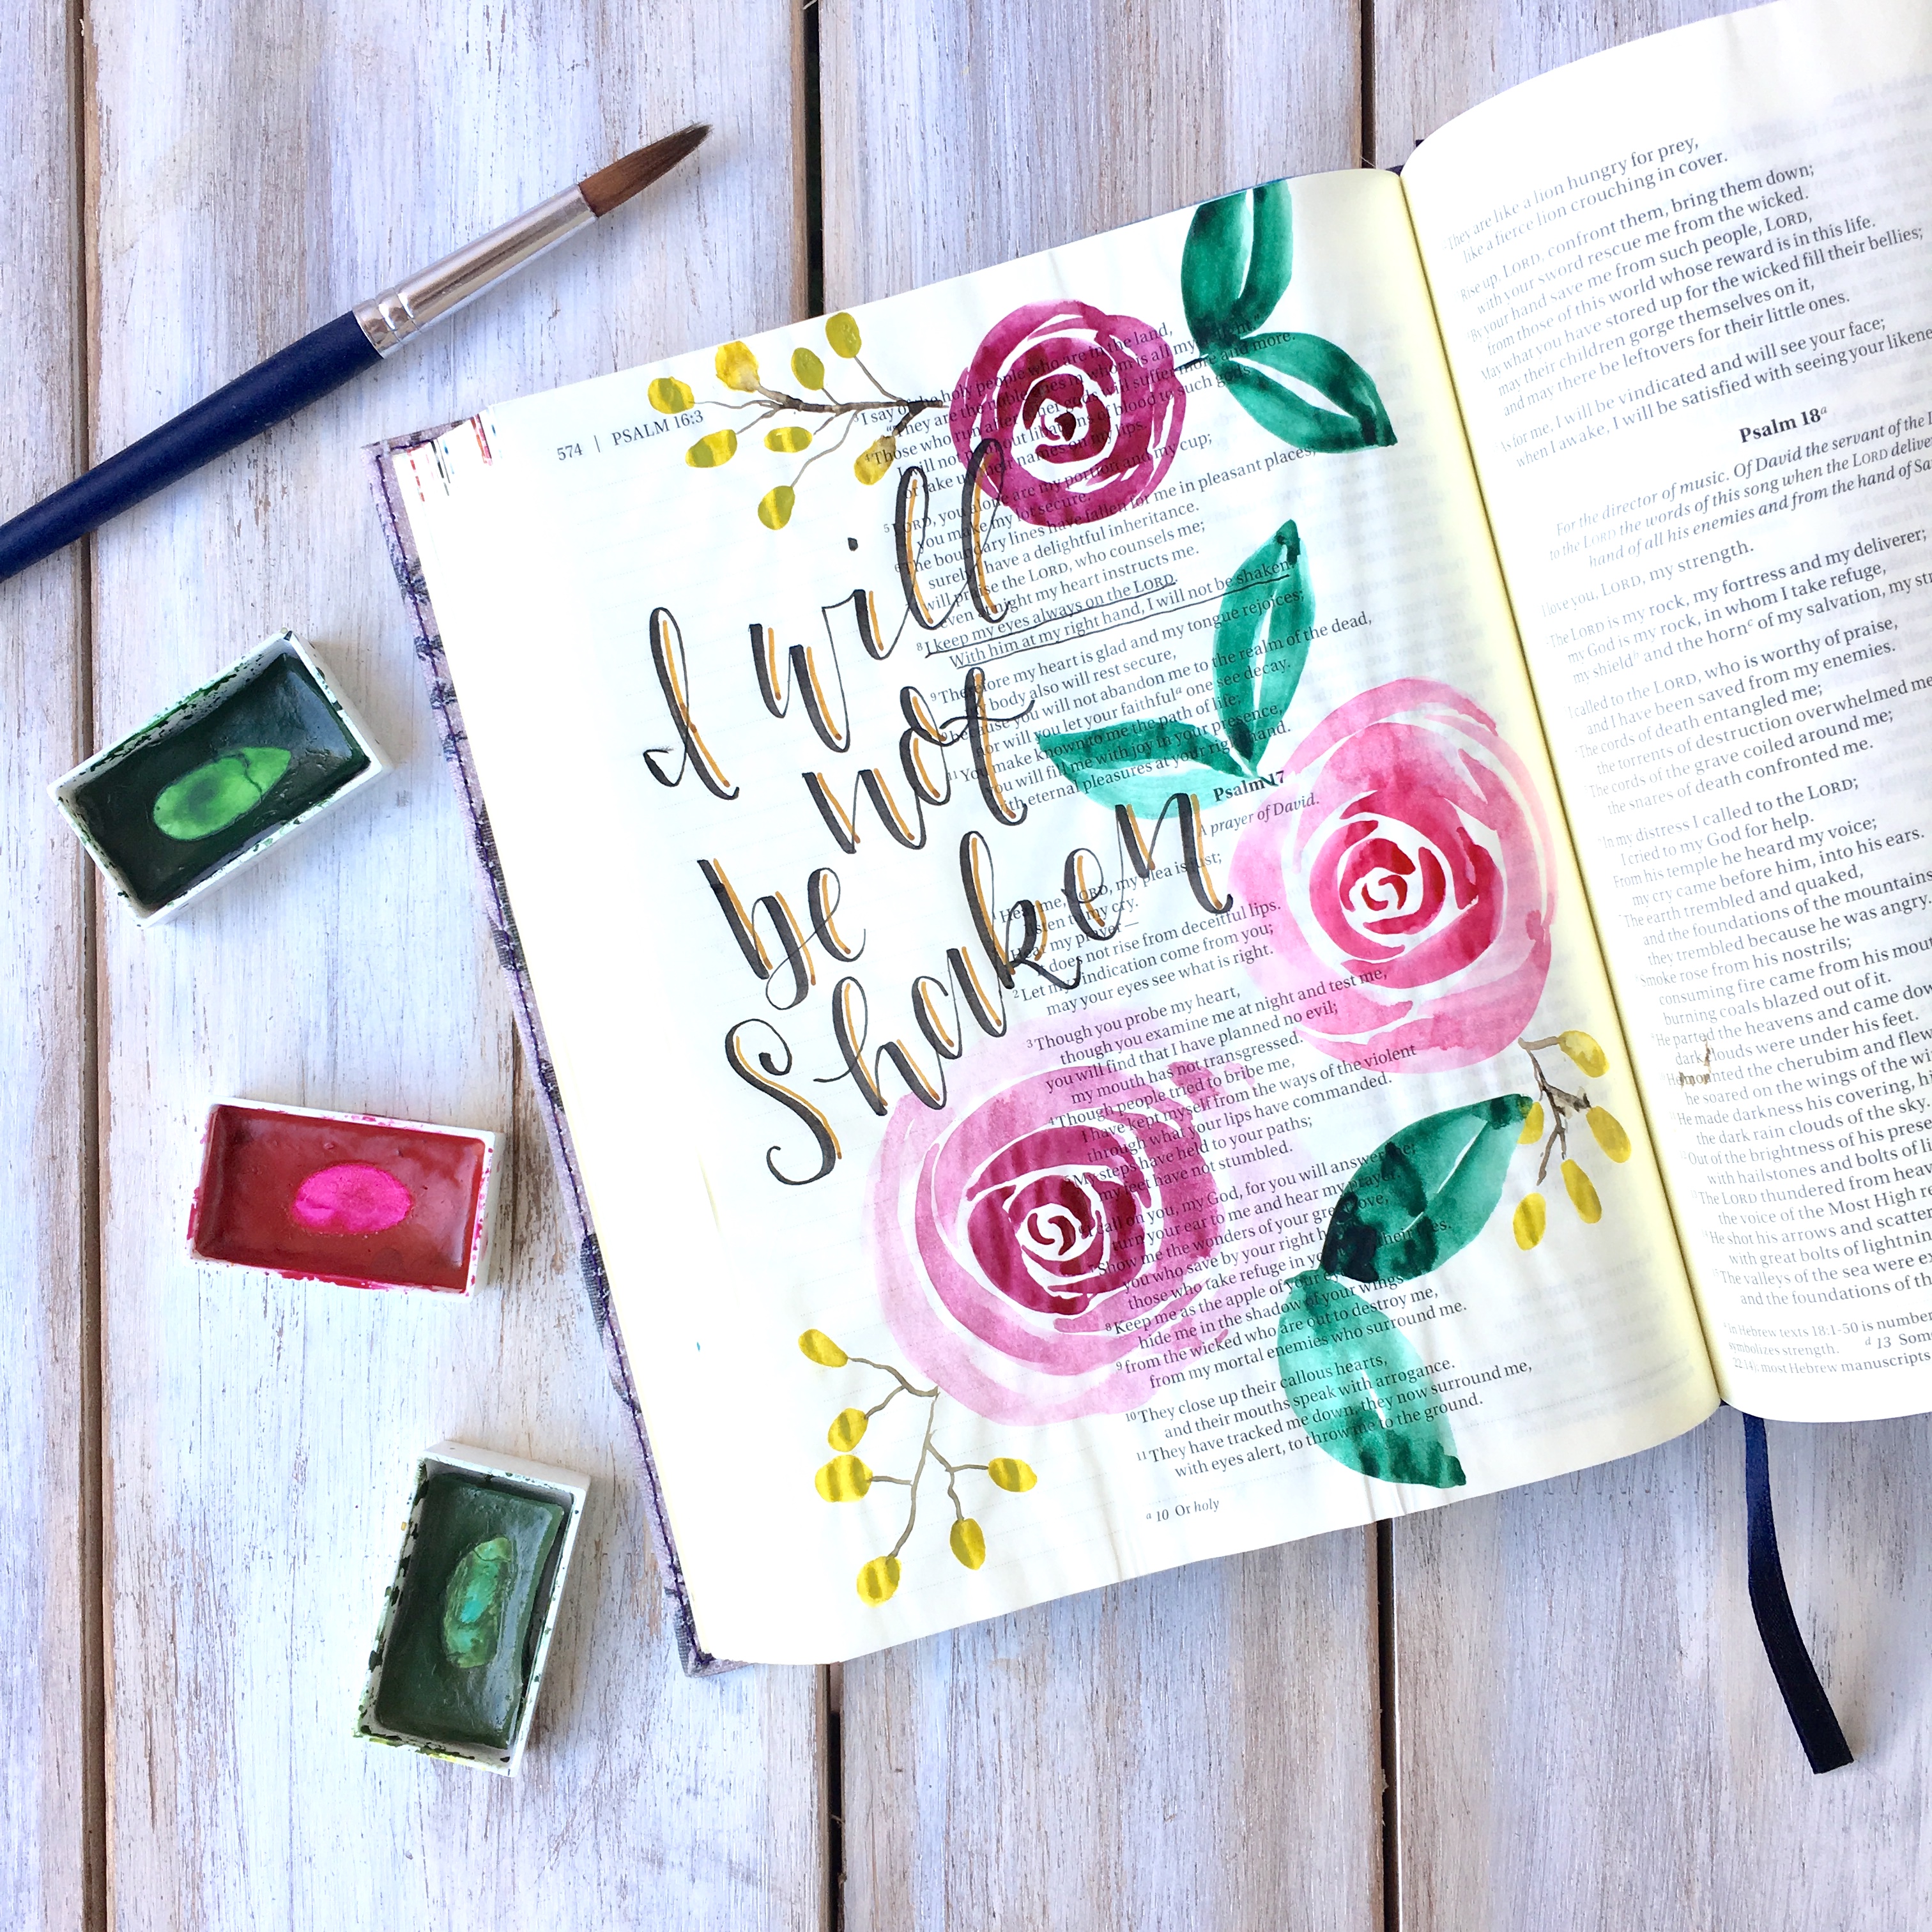 Learn how to make easy watercolor roses in your journaling Bible